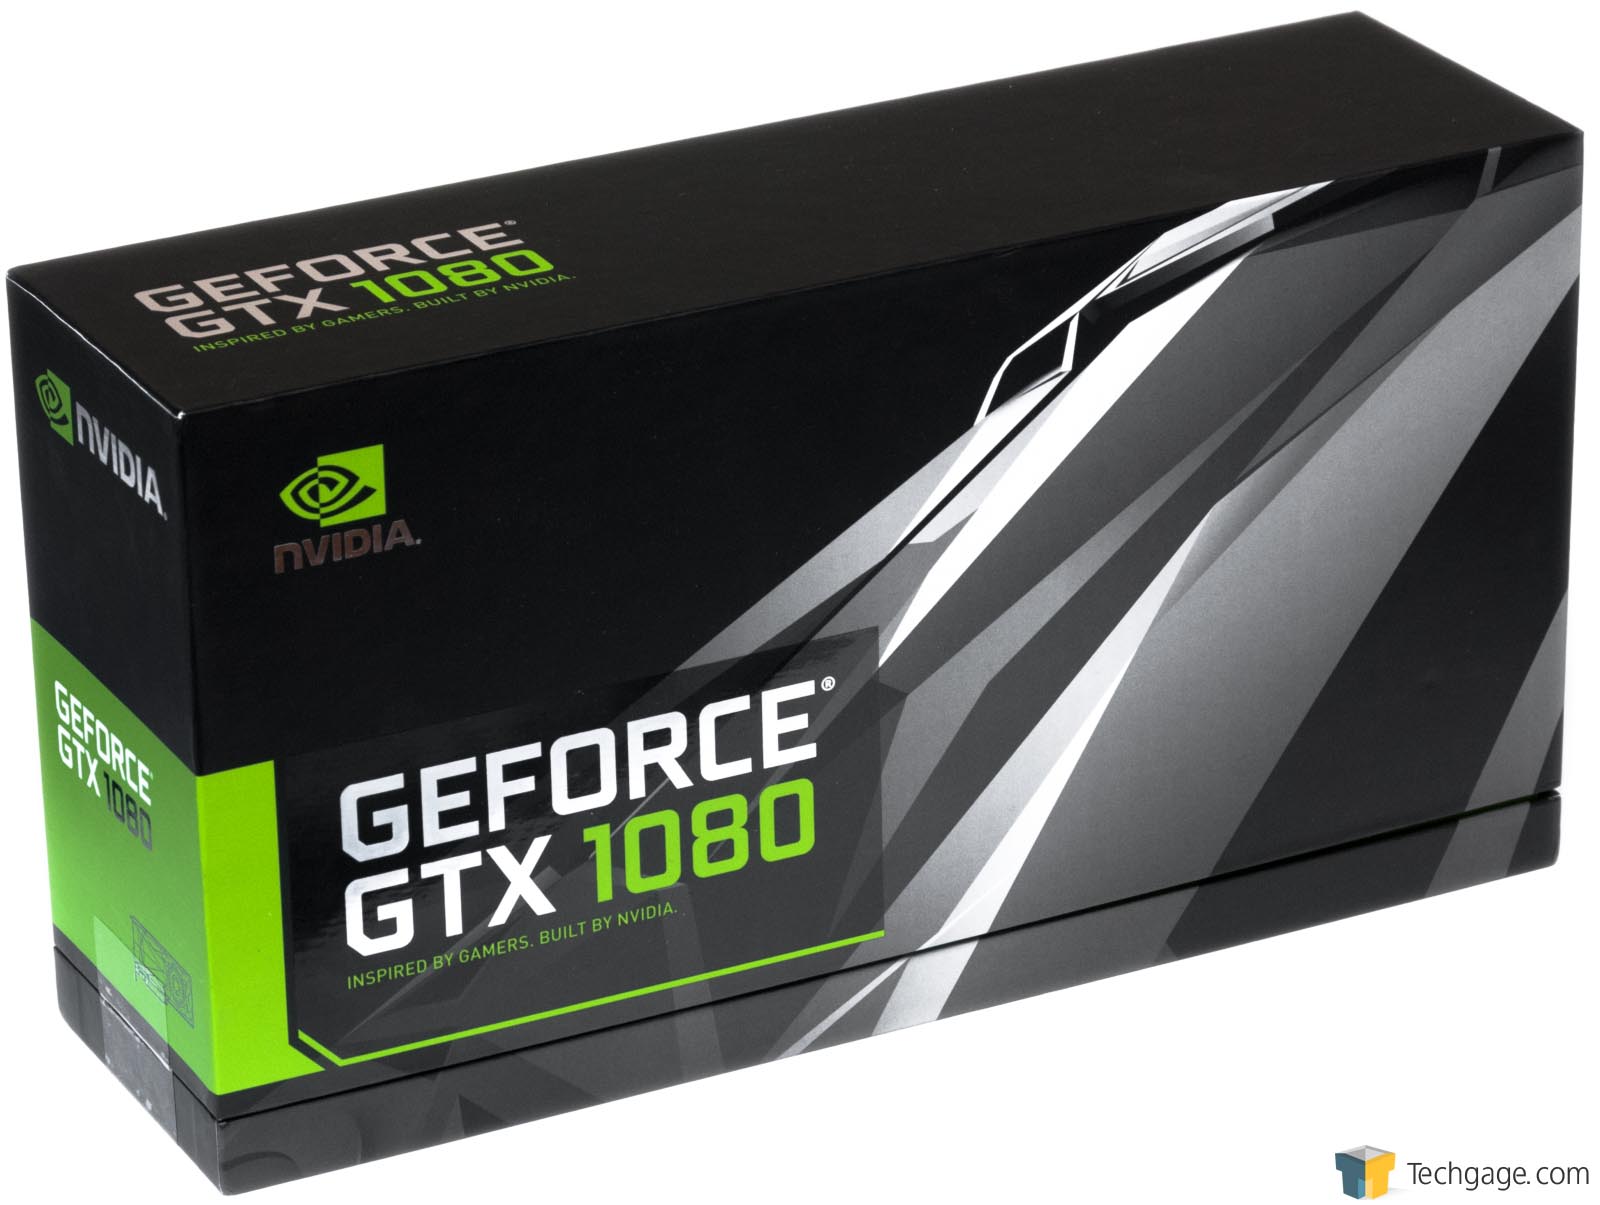 NVIDIA GeForce GTX 1080 Review: A Look At 4K & Ultra-wide Gaming – Techgage